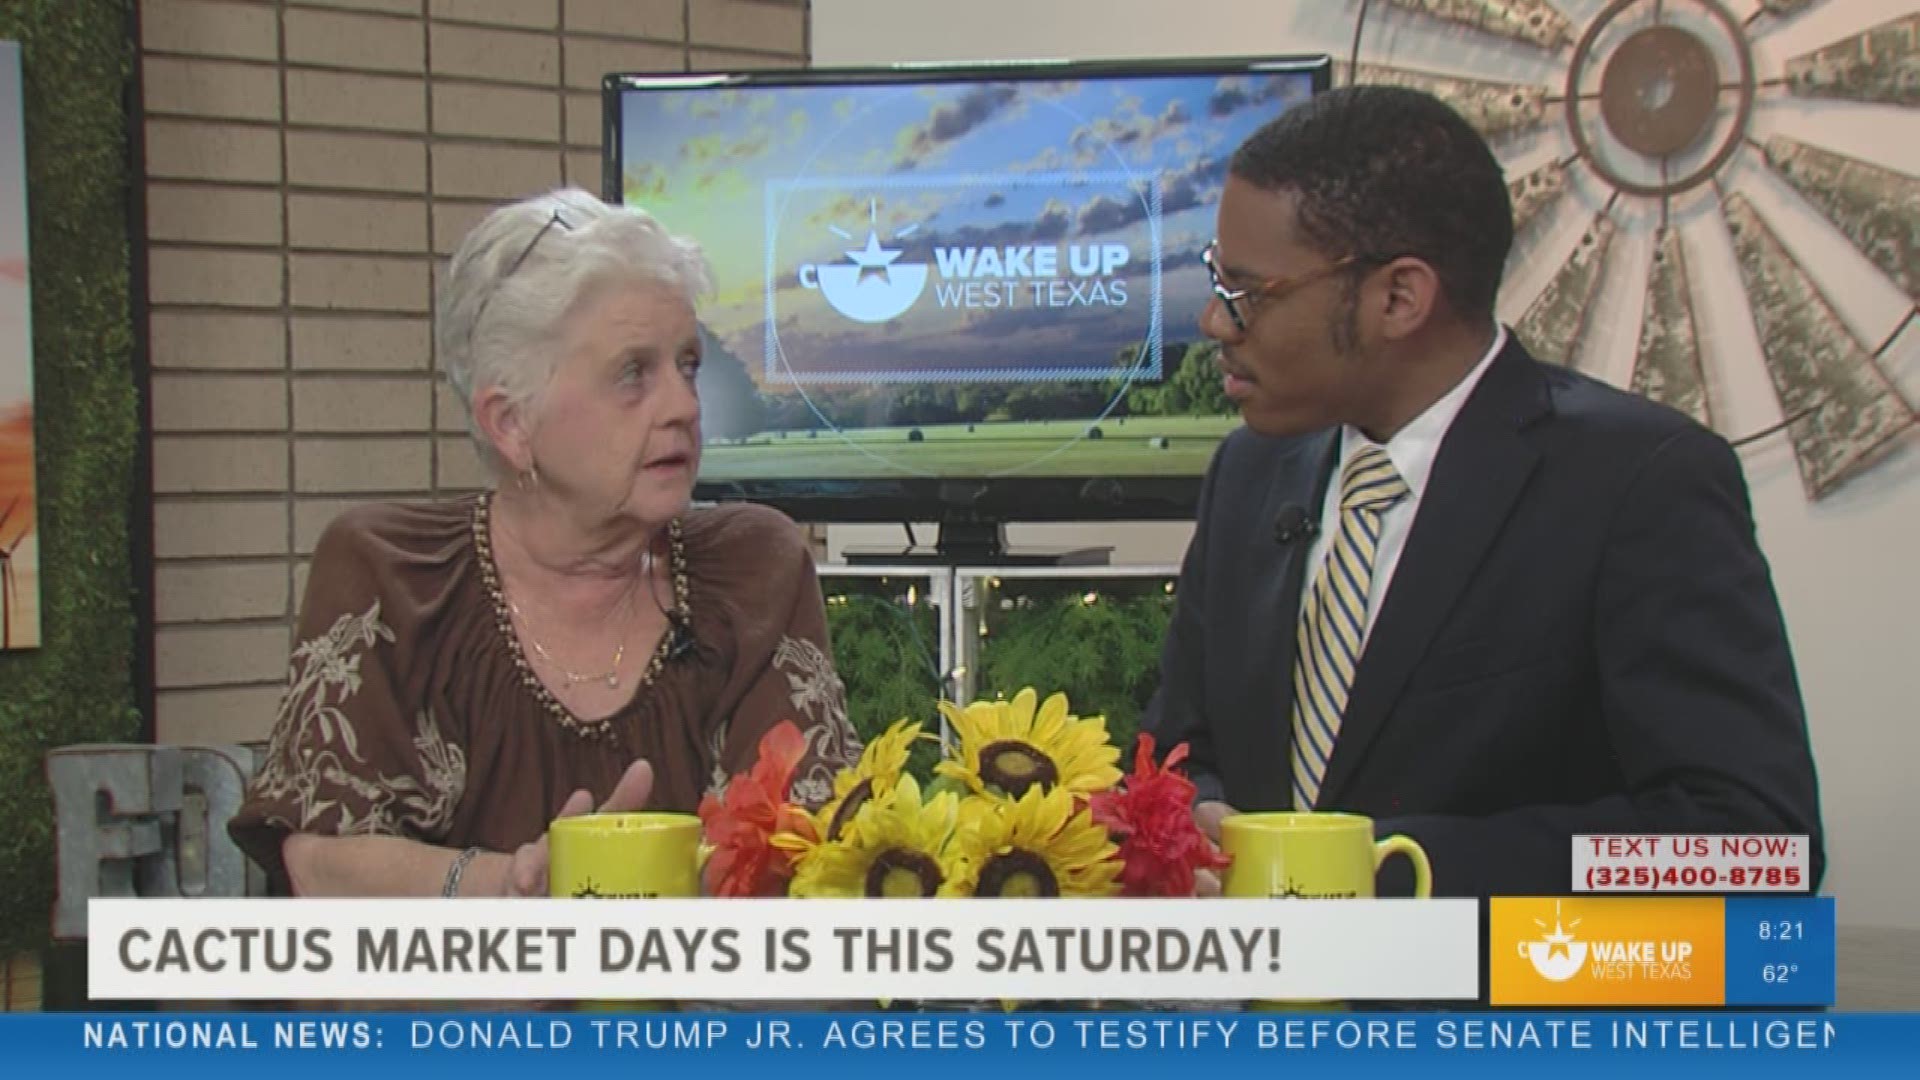 Our Malik Mingo spoke with Candles Handmade by JF about its upcoming participation in Cactus Market Days on May 18.